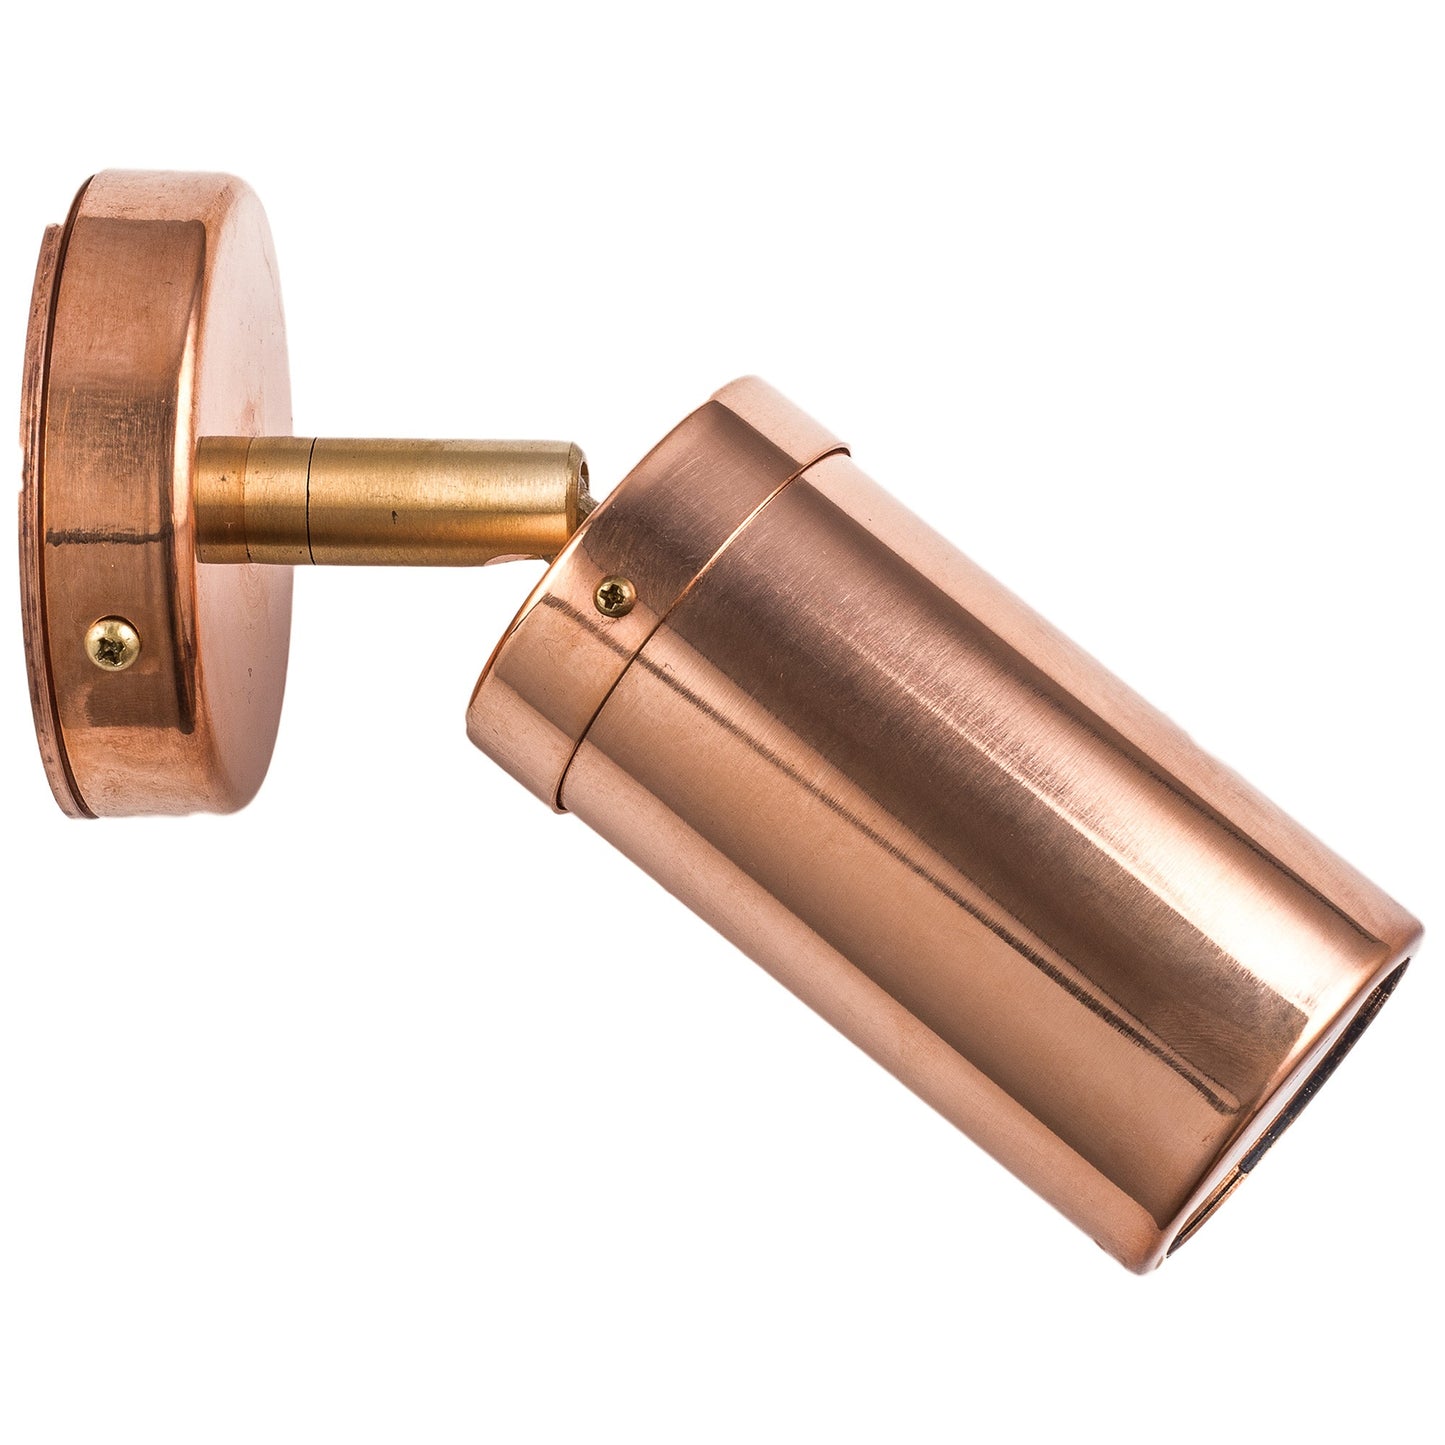 Roslin Economy IP54 Exterior Single Adjustable Wall Light, GU10, Copper with Brass Knuckle